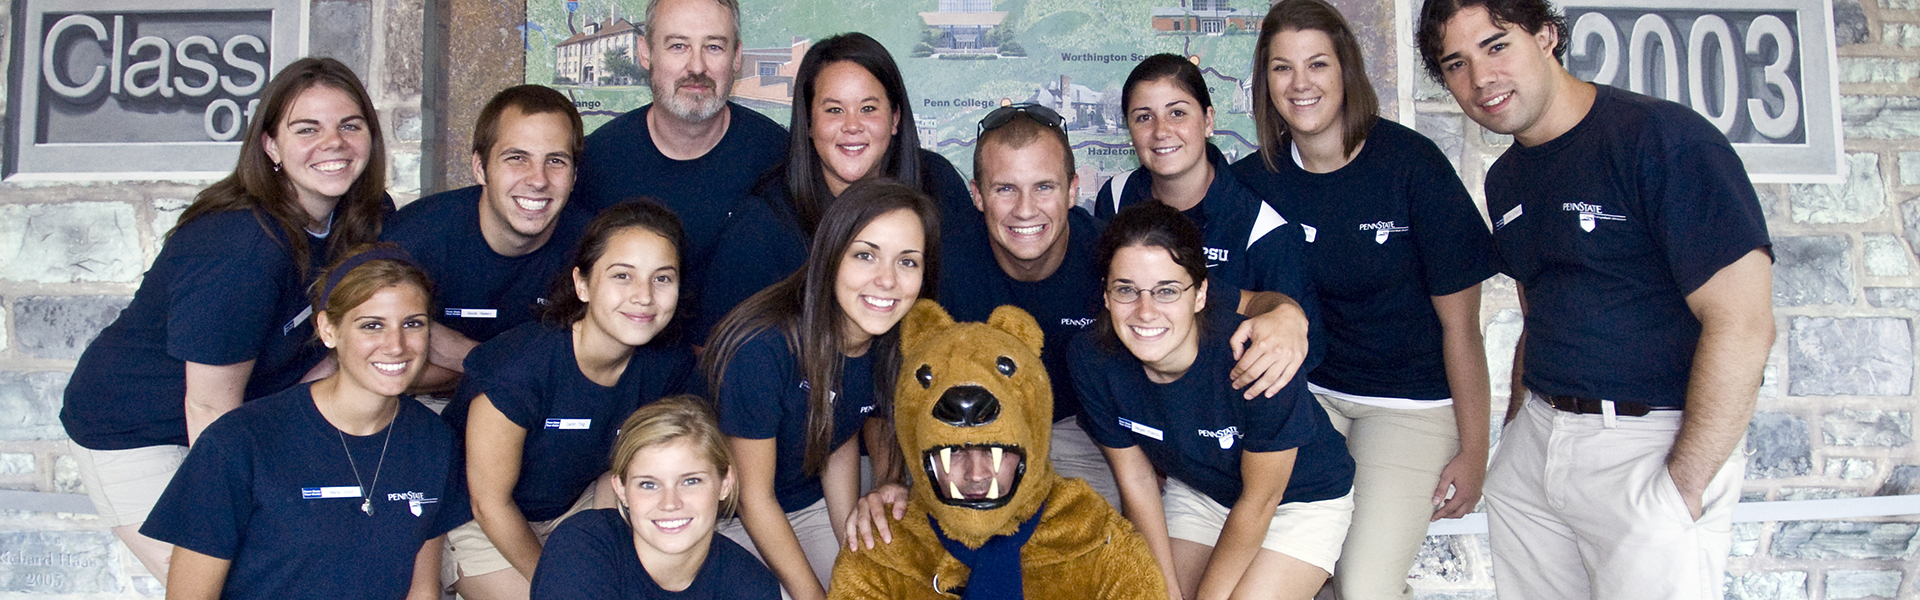 Students with Nittany Lion